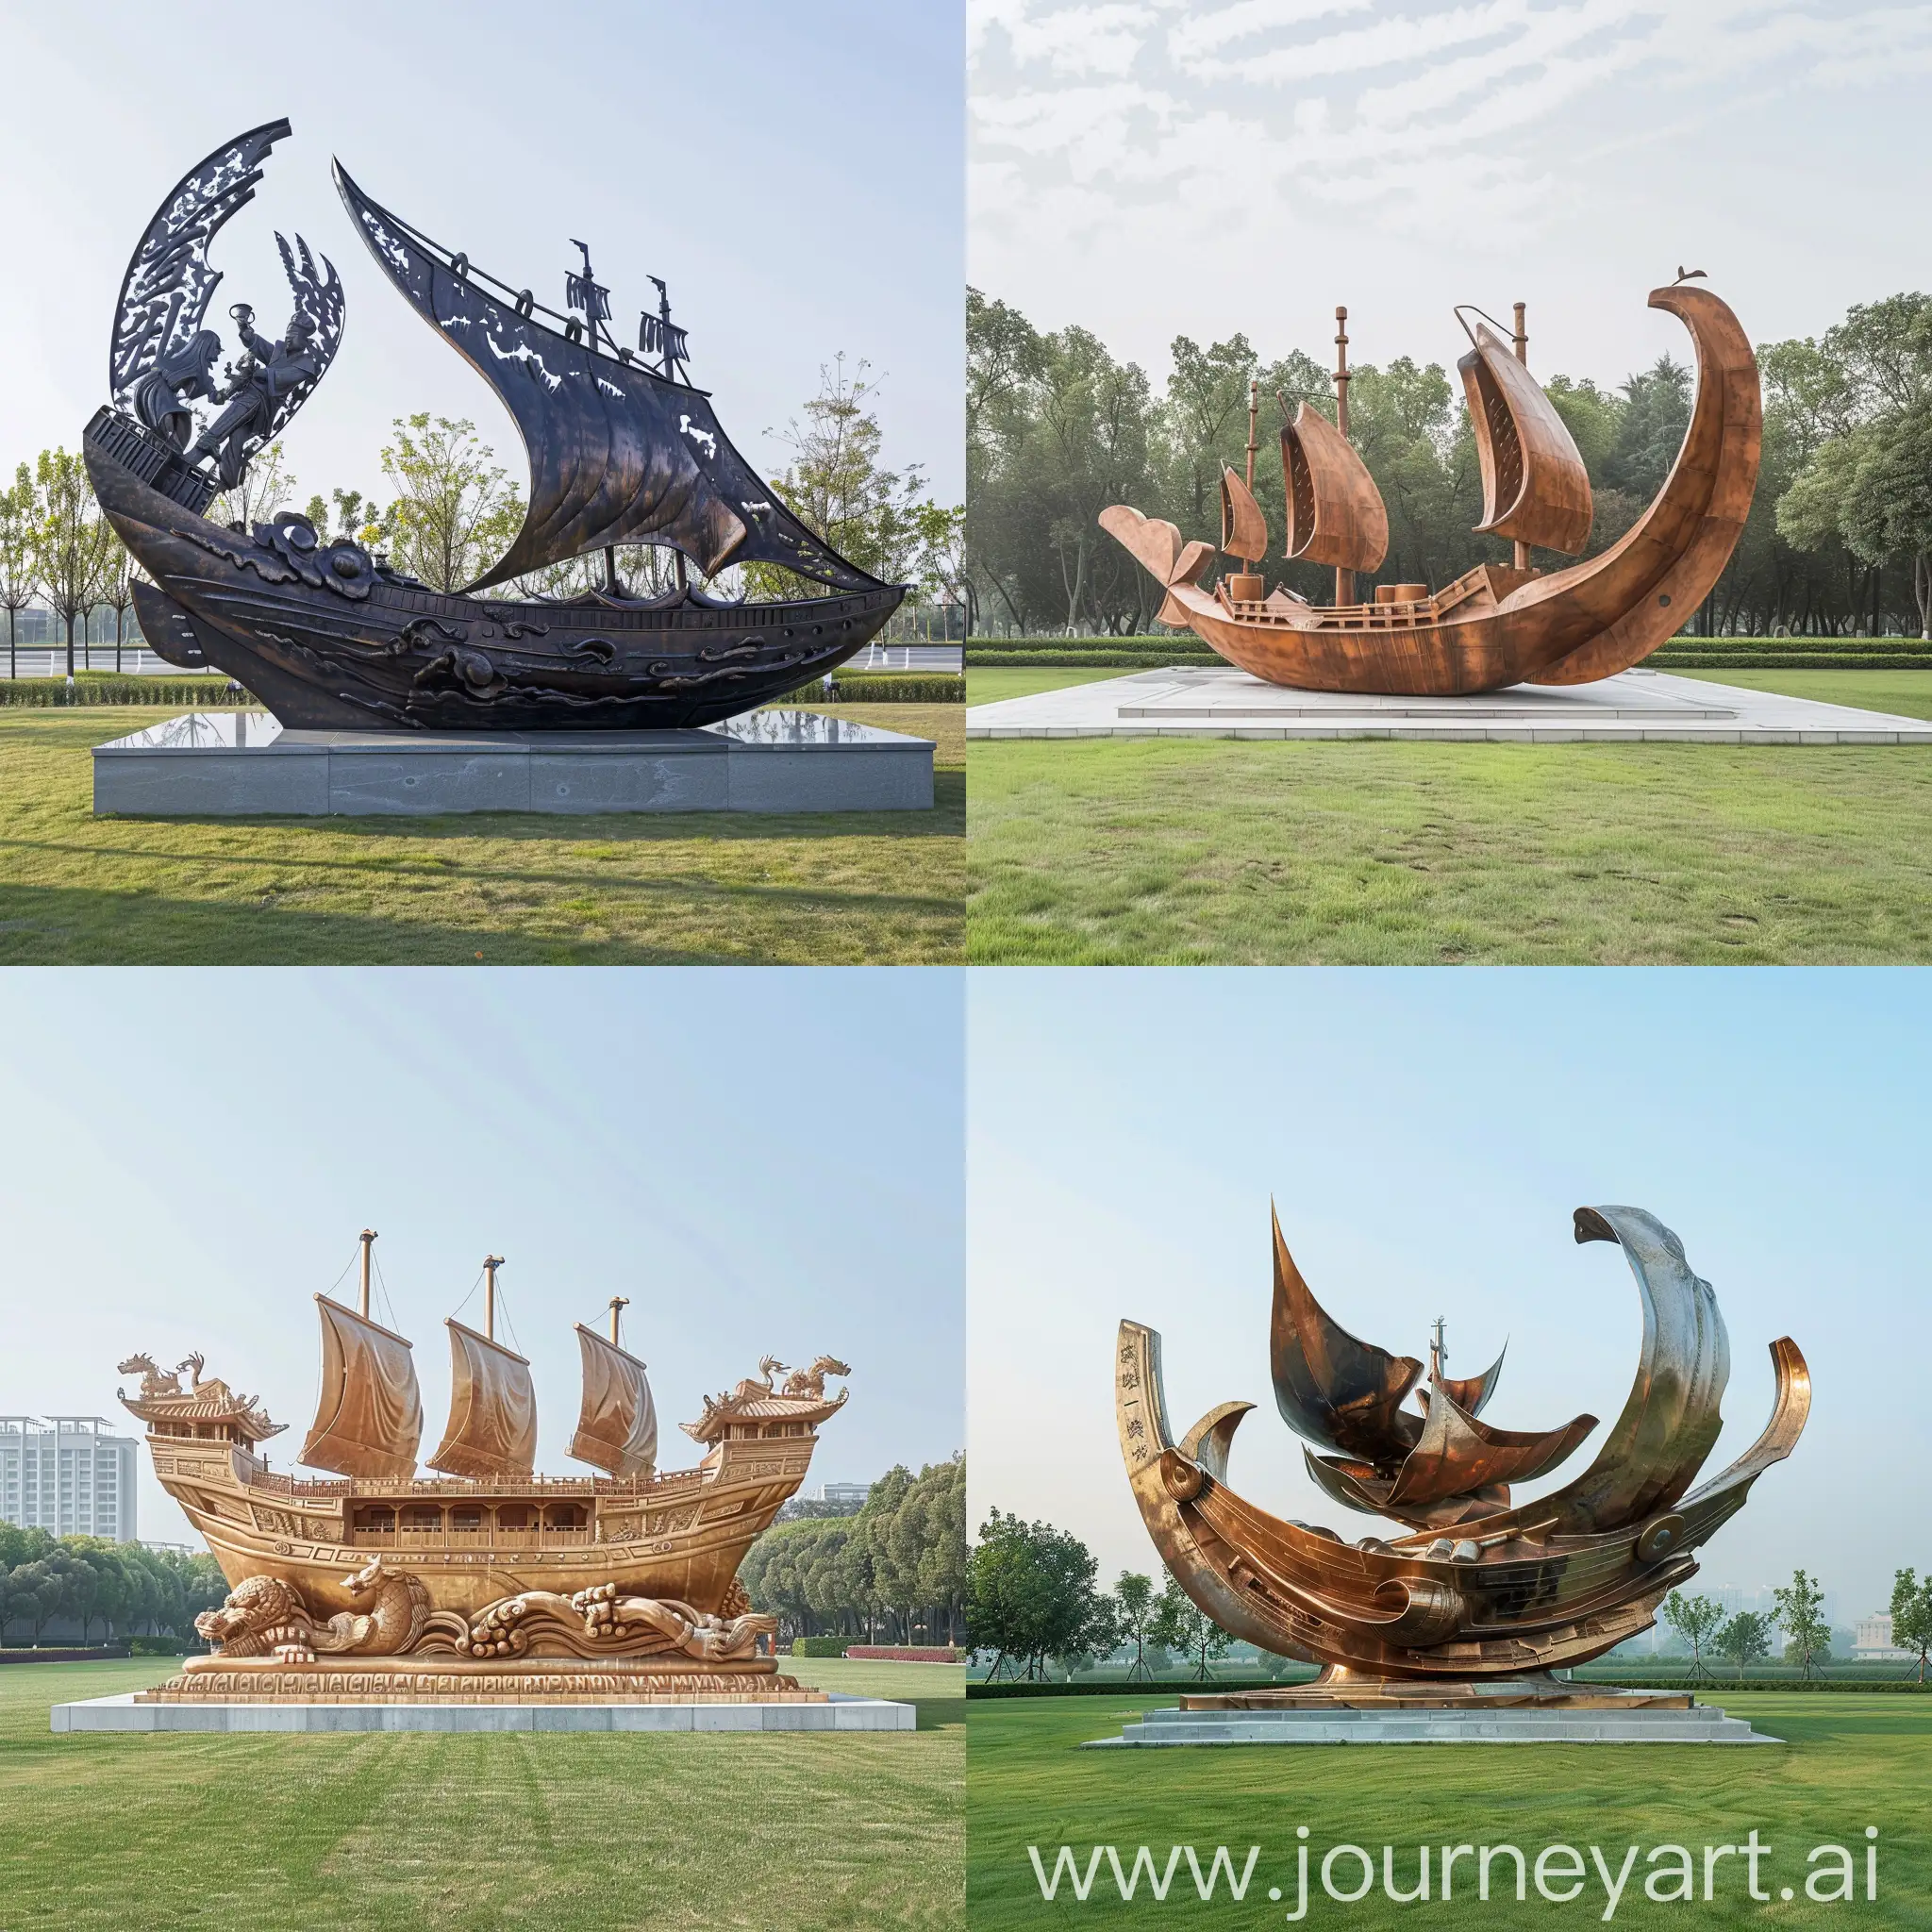 The sculpture is based on the theme of integrity,Chinese naval culture,located in the middle of a wide lawn,